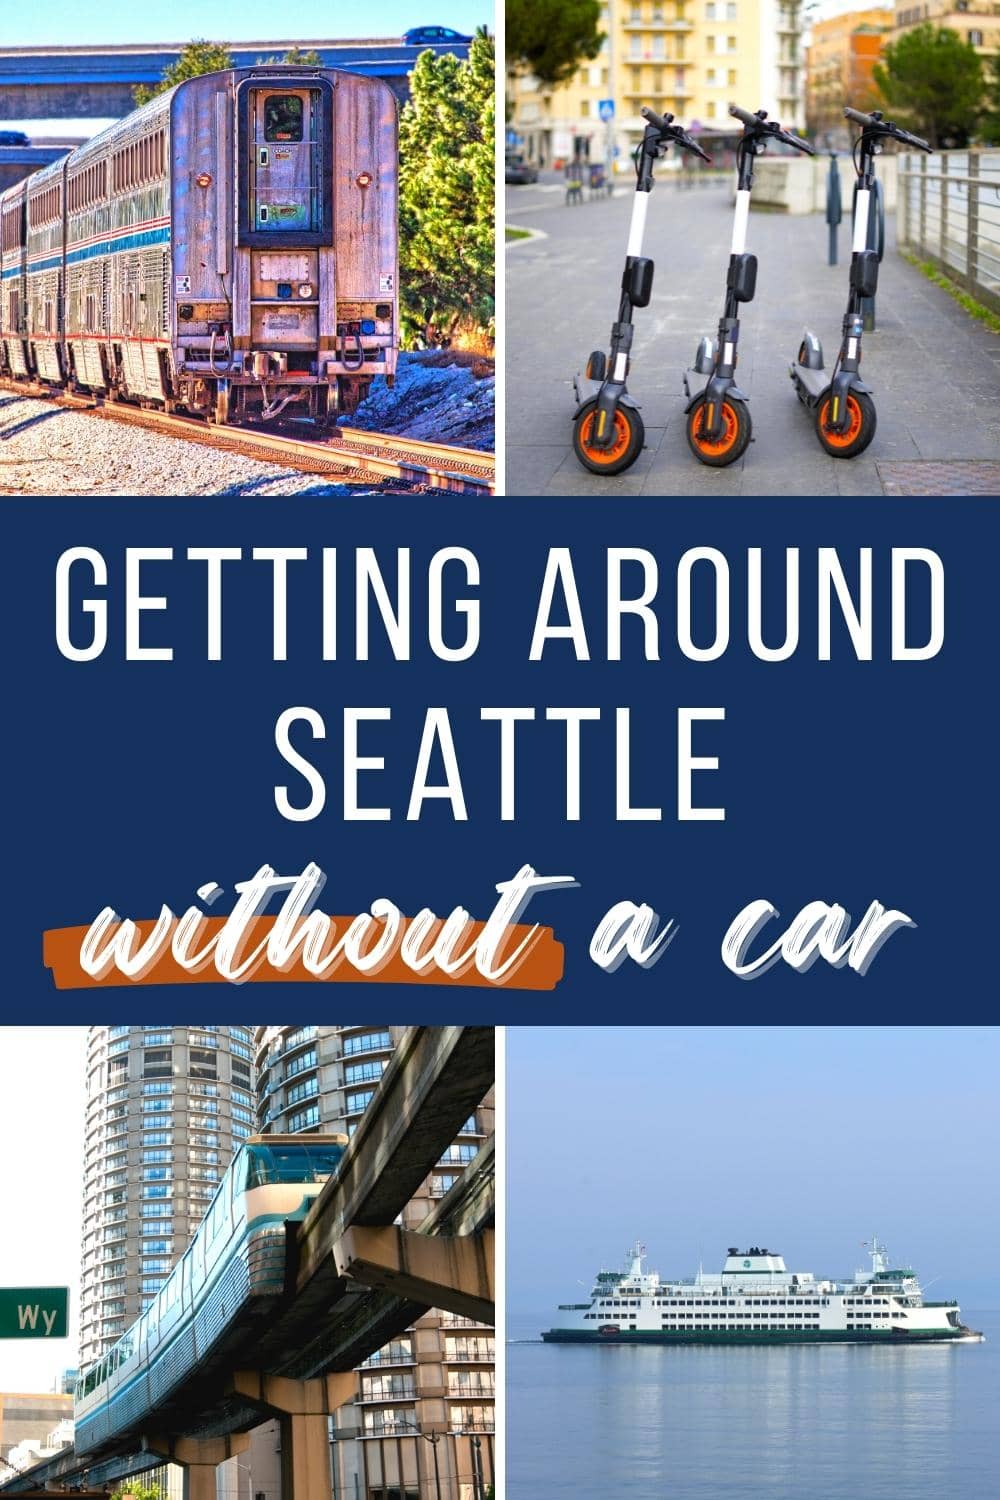 9 Ways for Getting Around Seattle without a Car {Easier Than You Think!}